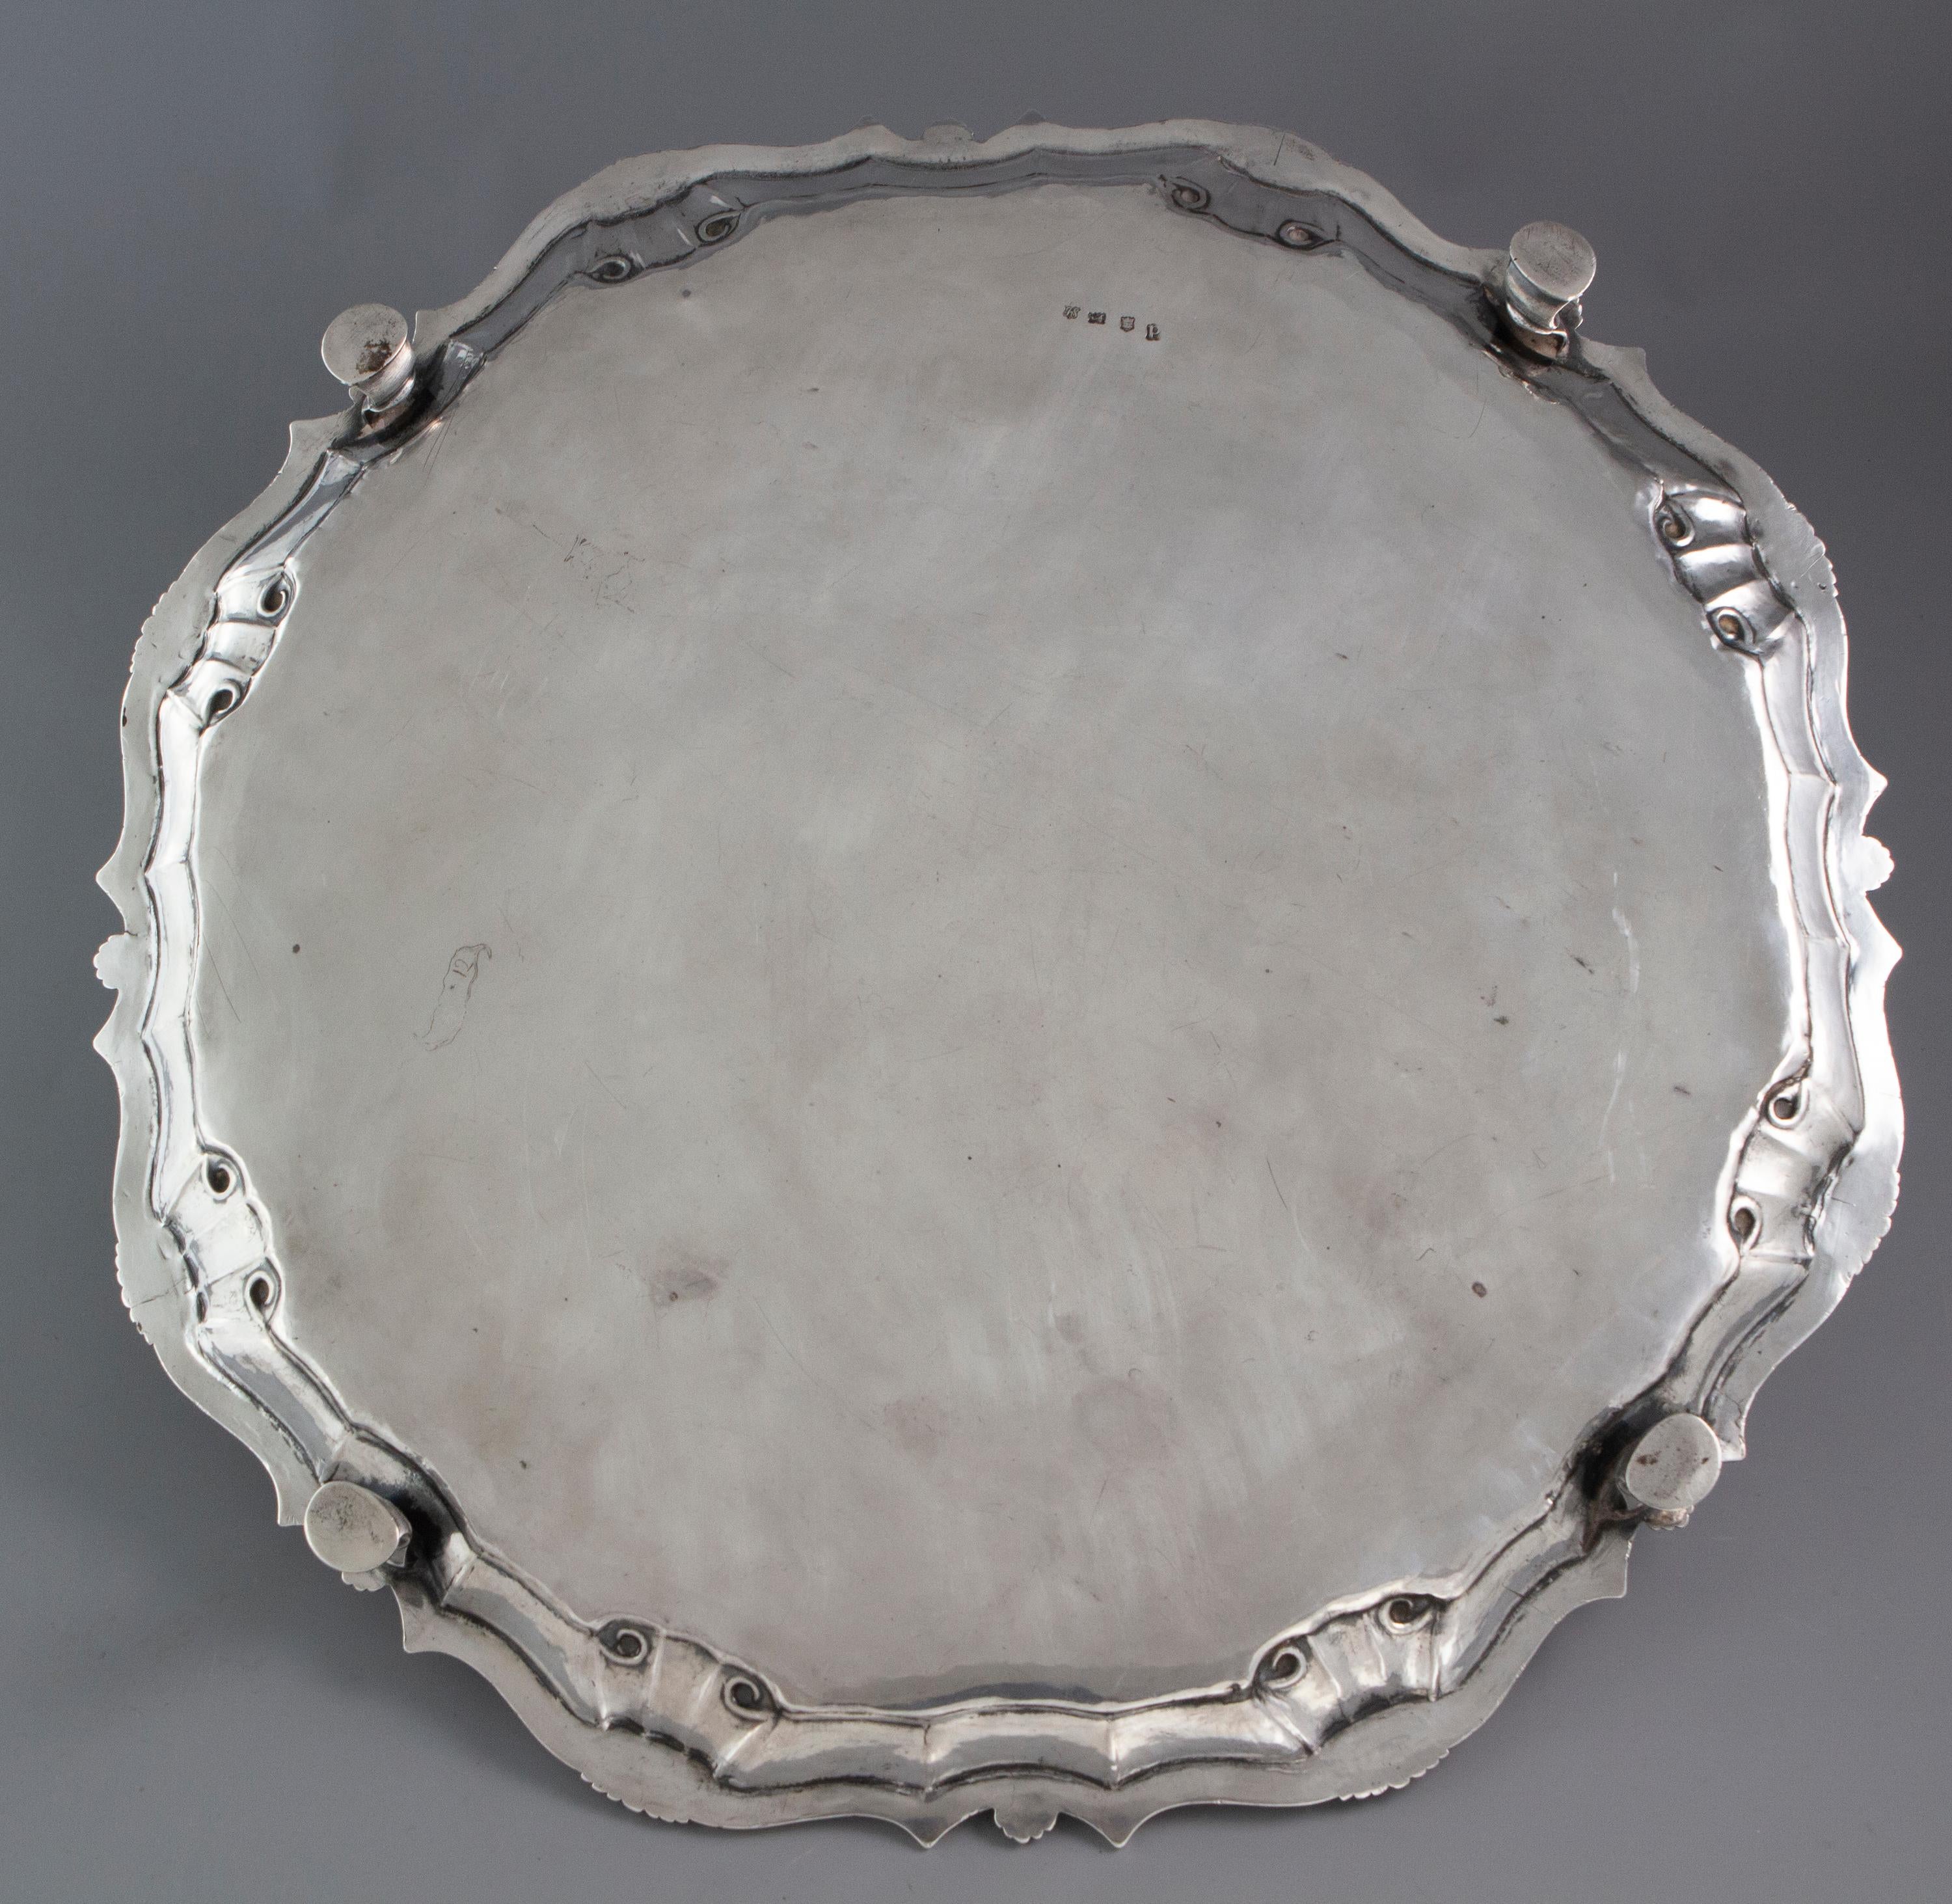 A very fine George II silver salver or tray of large shaped circular form. A cast and applied shell and scroll gallery, with the plain central plate engraved with a vacant rocaille cartouche. The whole standing on four hoof feet.

Clearly